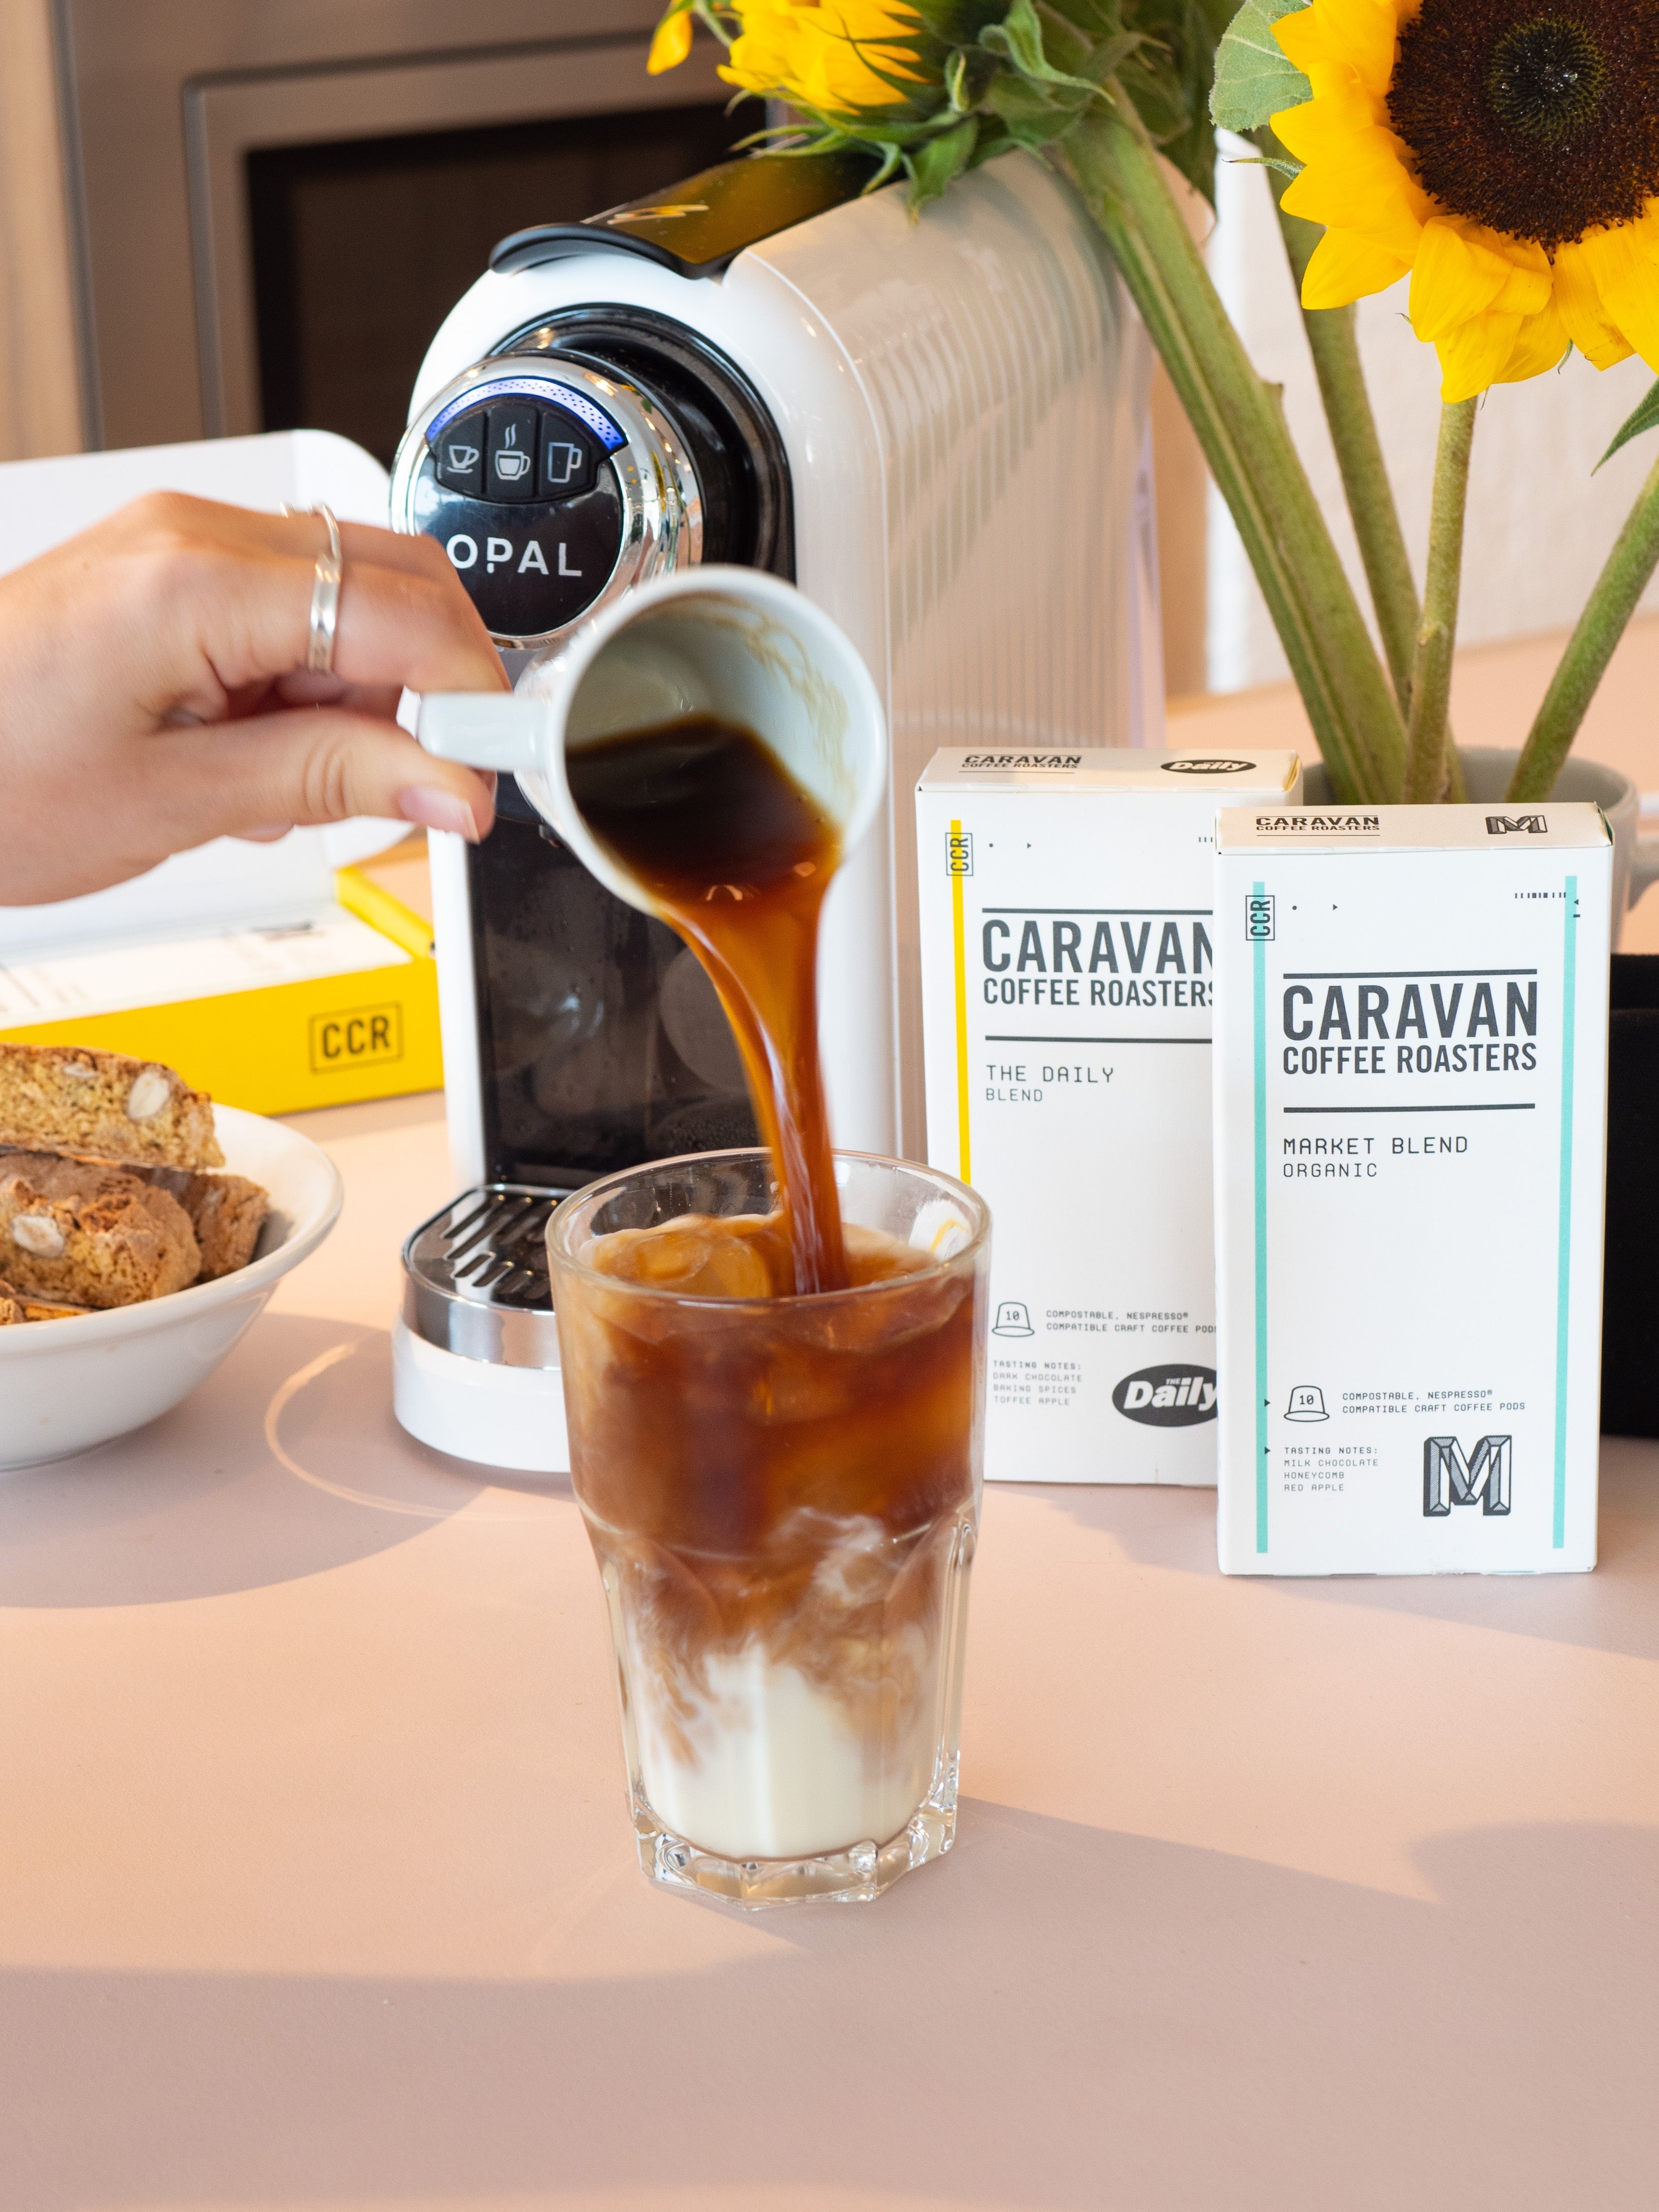 Caravan Coffee Roasters - The Daily Blend Pods (10 x 10 Pods) // Stores Supply // Caravan